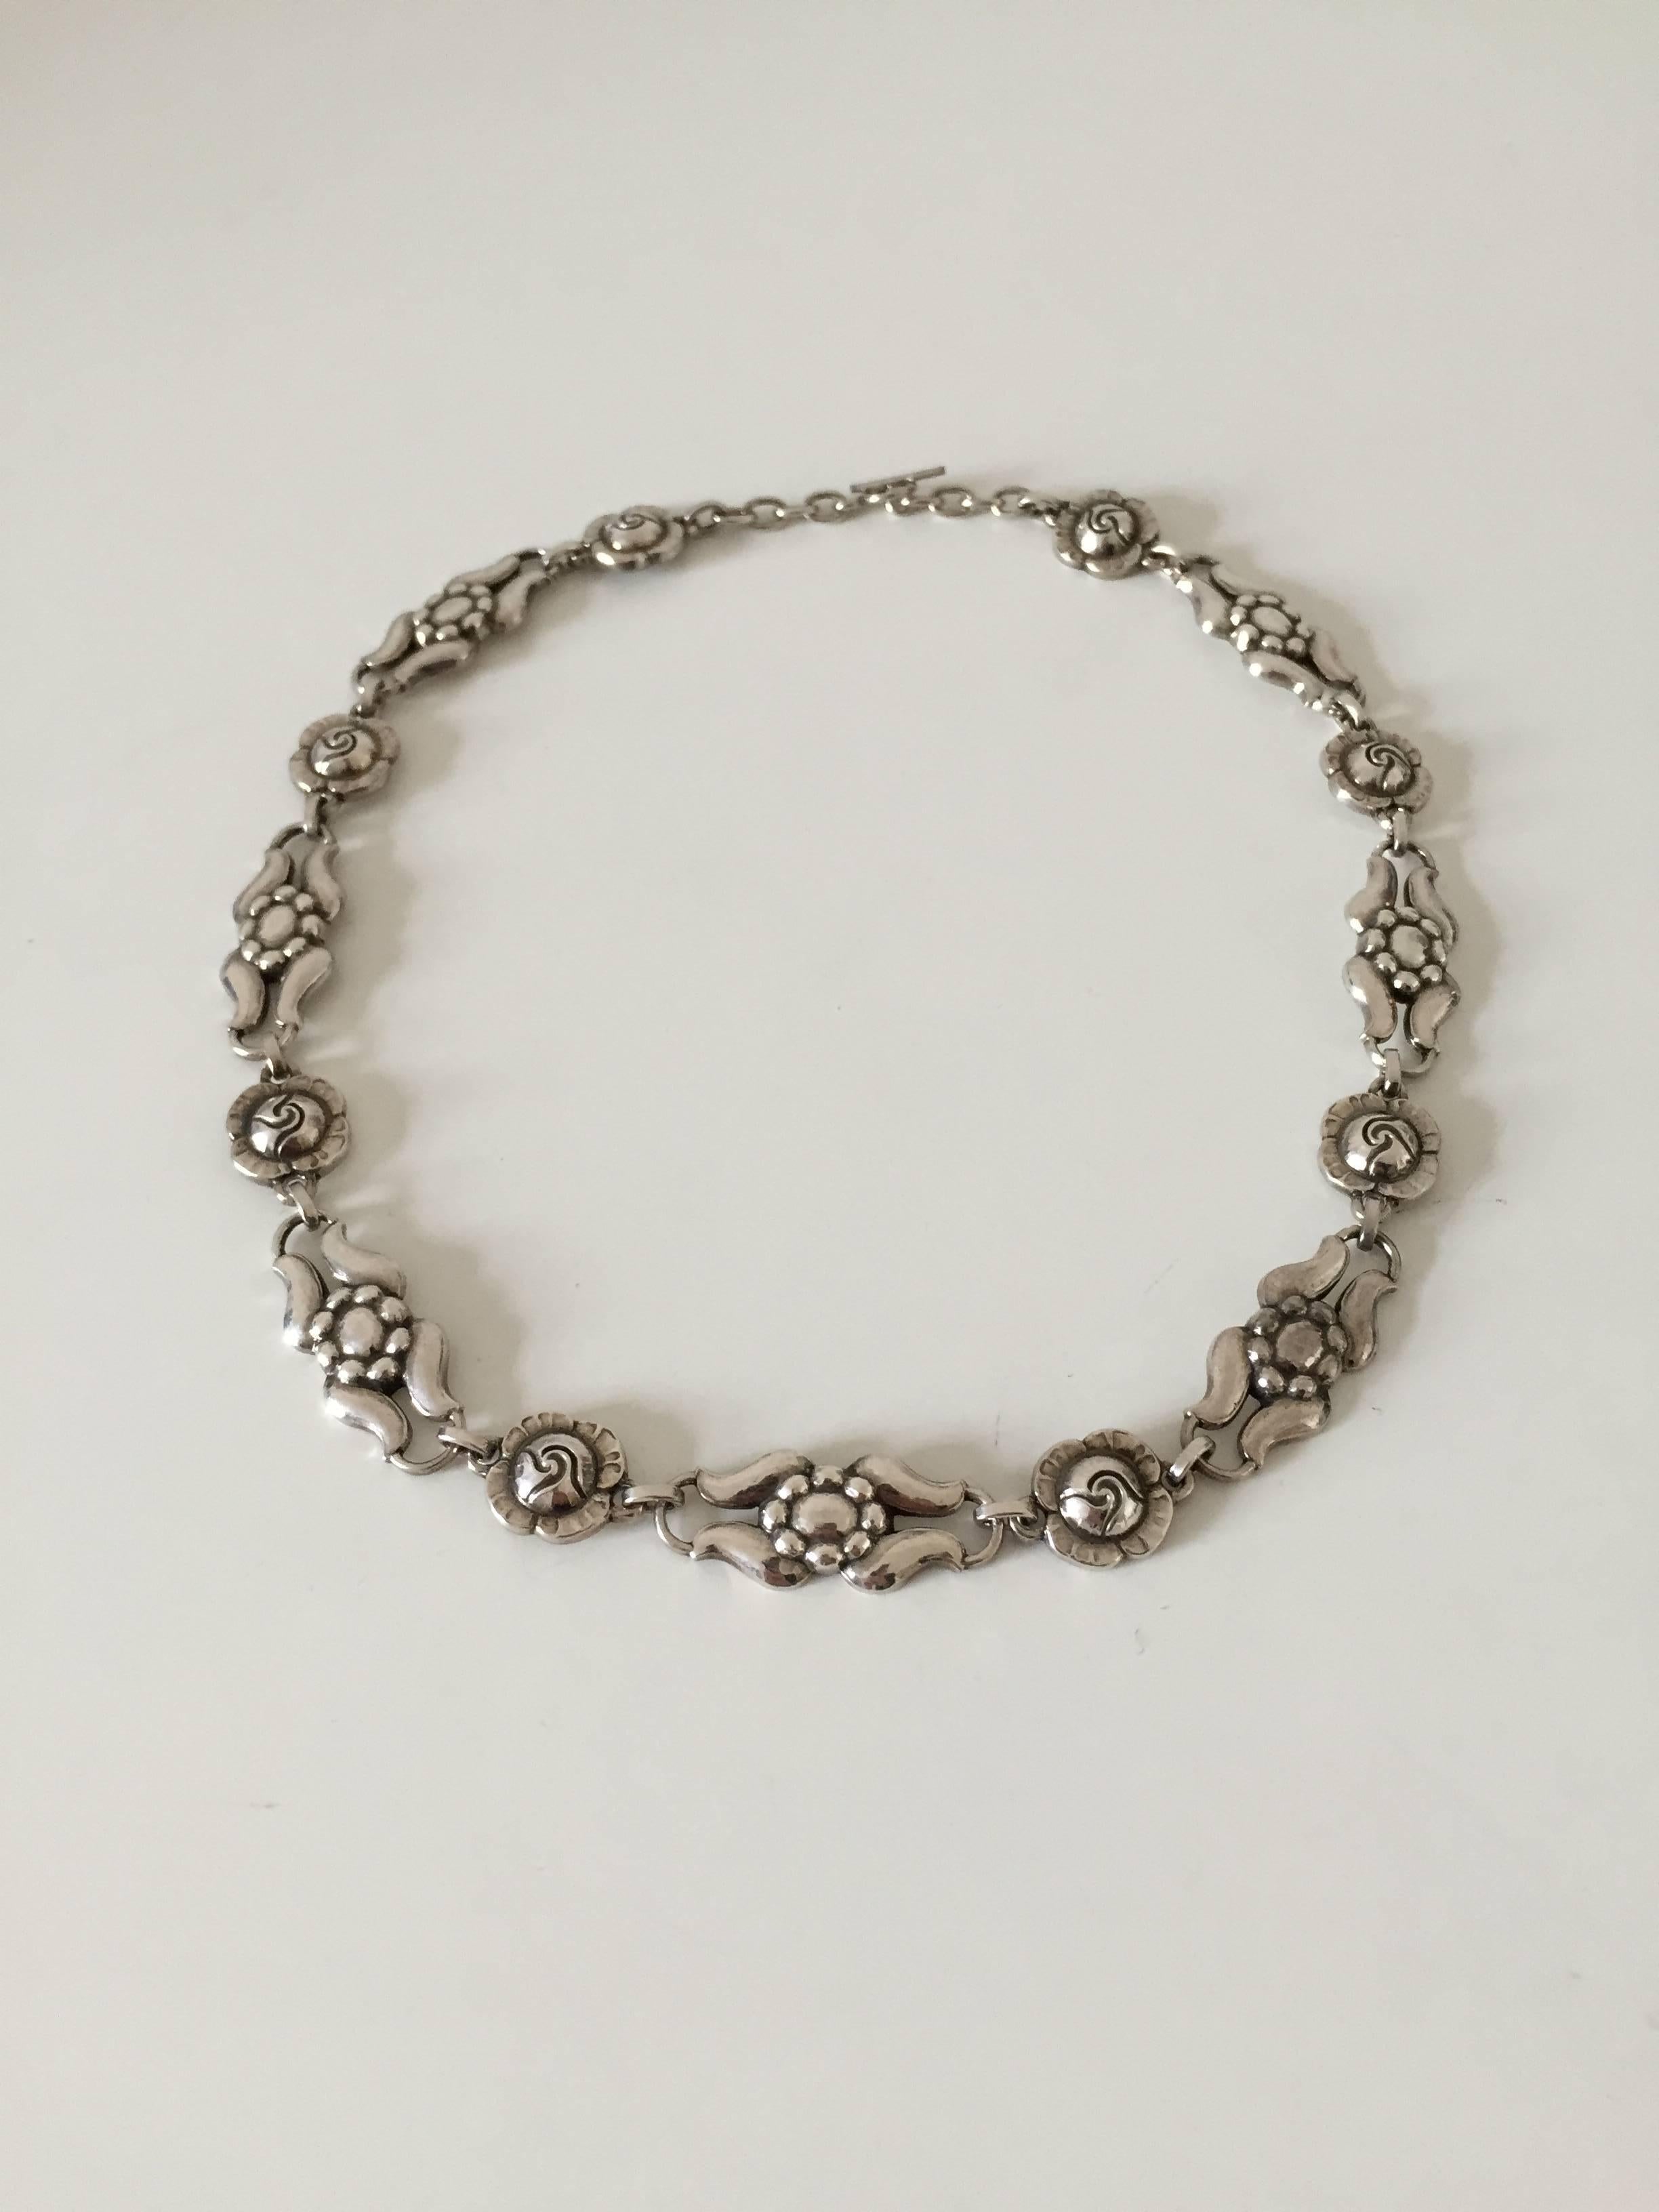 Georg Jensen sterling silver necklace. The necklace is from 1910-1925 and is in a good condition. It measures 42 cm long, weighs 29.5 g / 1.04 oz.

Georg Jensen (1866-1935) opened his small silver atelier in Copenhagen, Denmark in 1904. By 1935